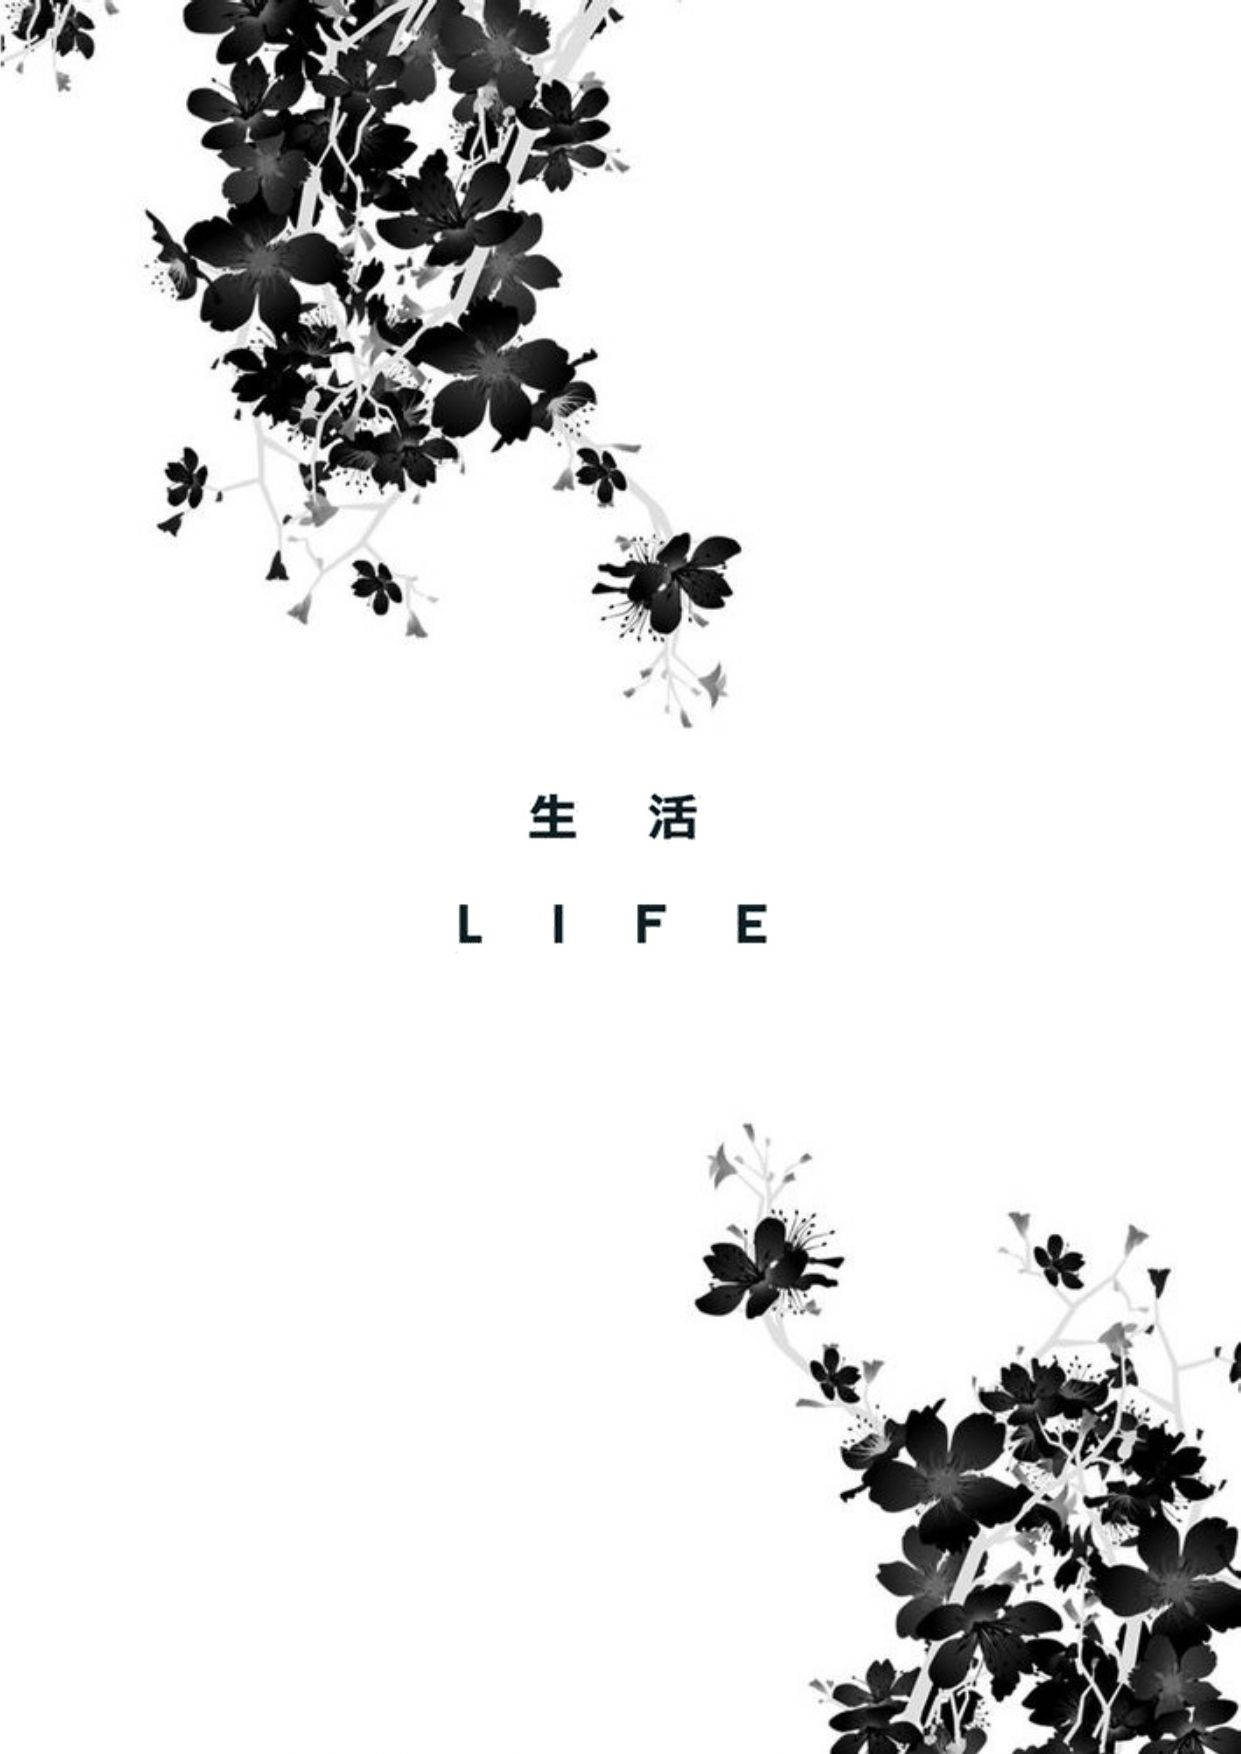 Life and Death wallpaper by IcePhoenix9879  Download on ZEDGE  9d56